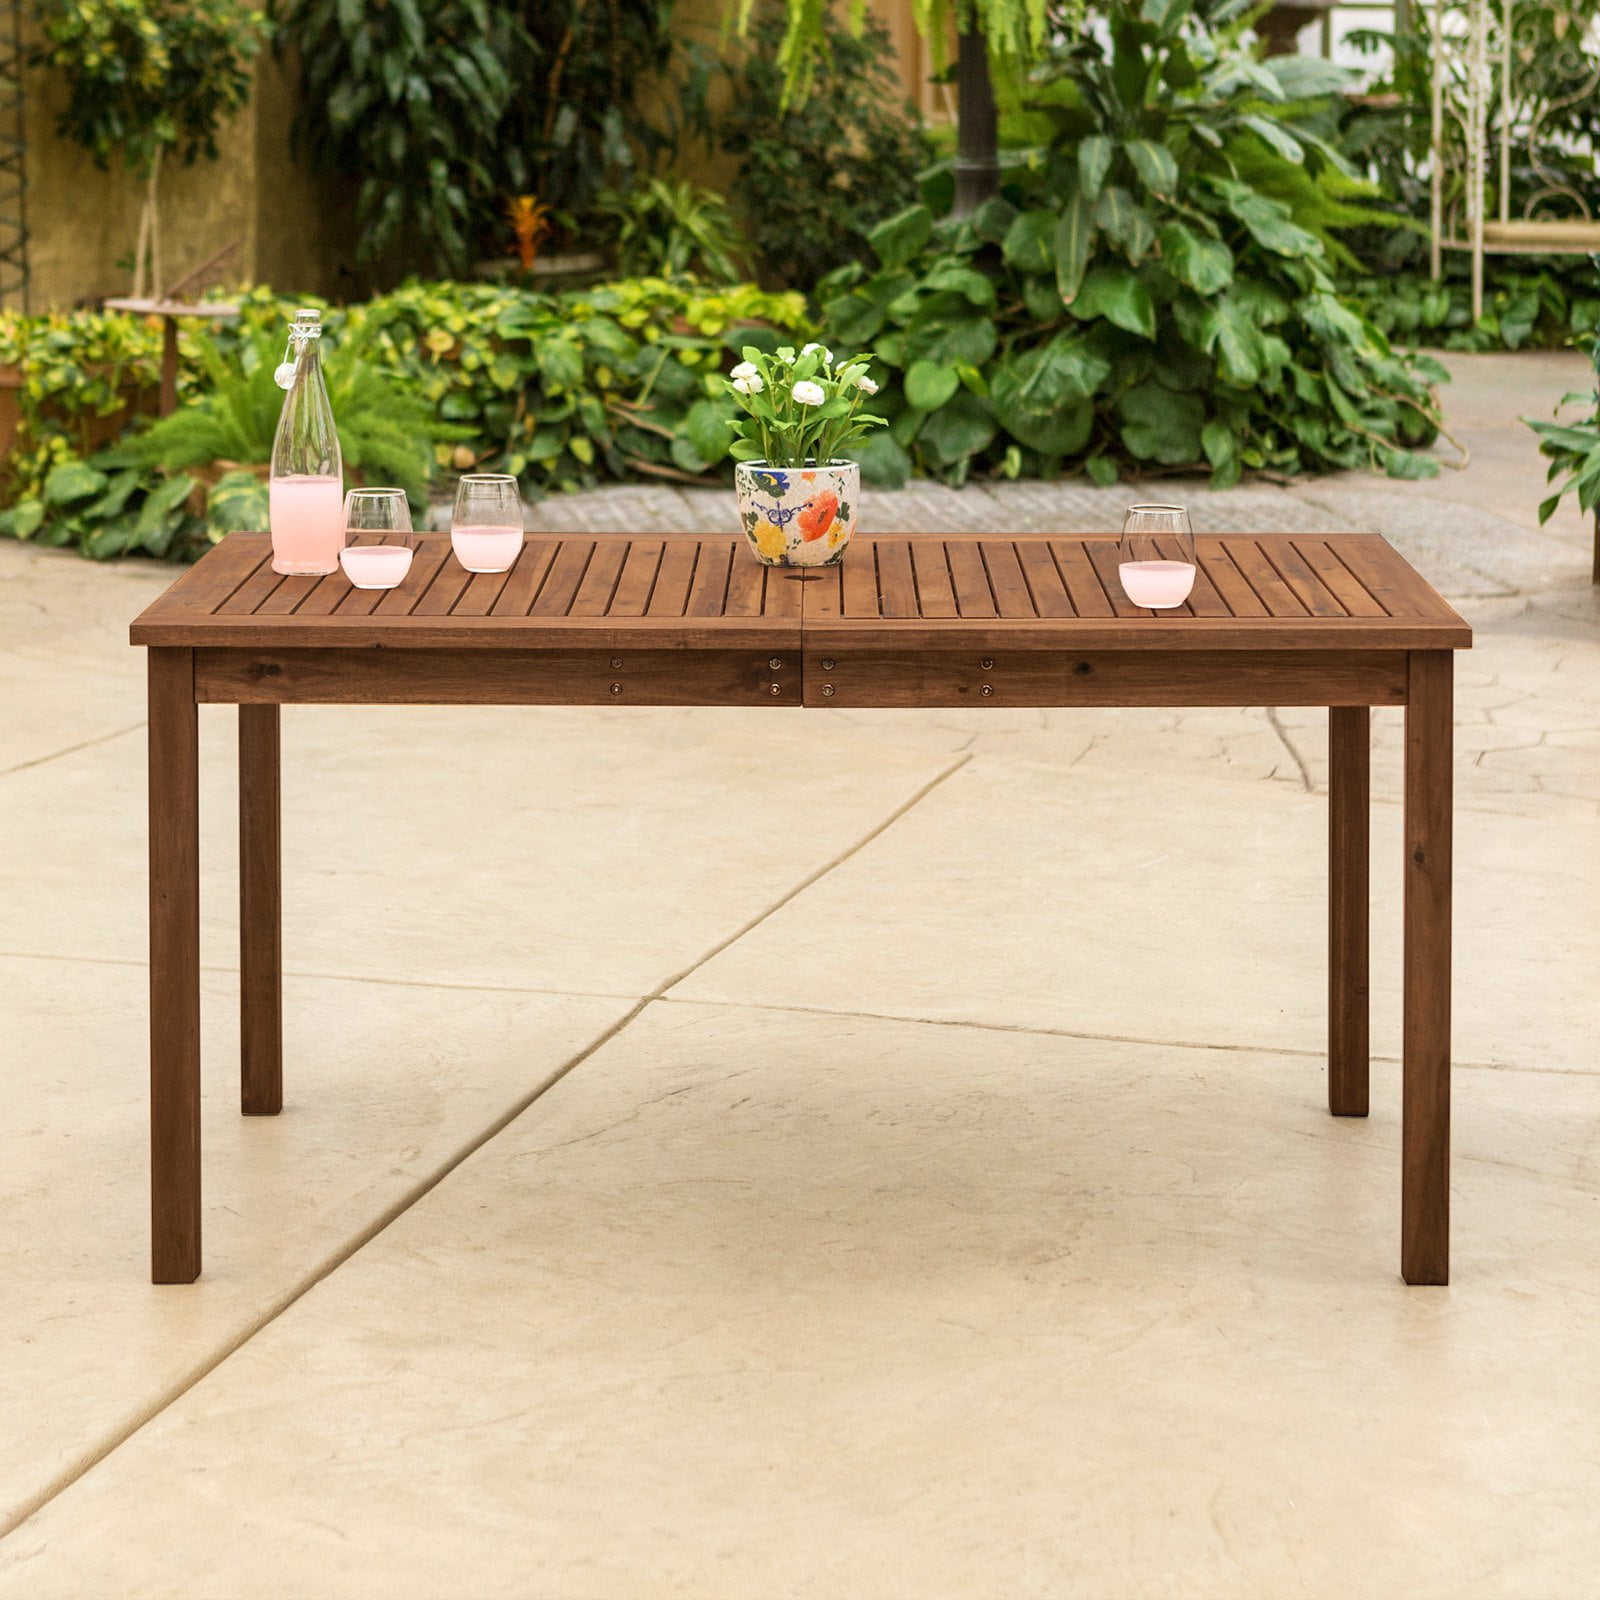 Karmas Product Patio Dining Table Outdoor Metal Table Aluminum 